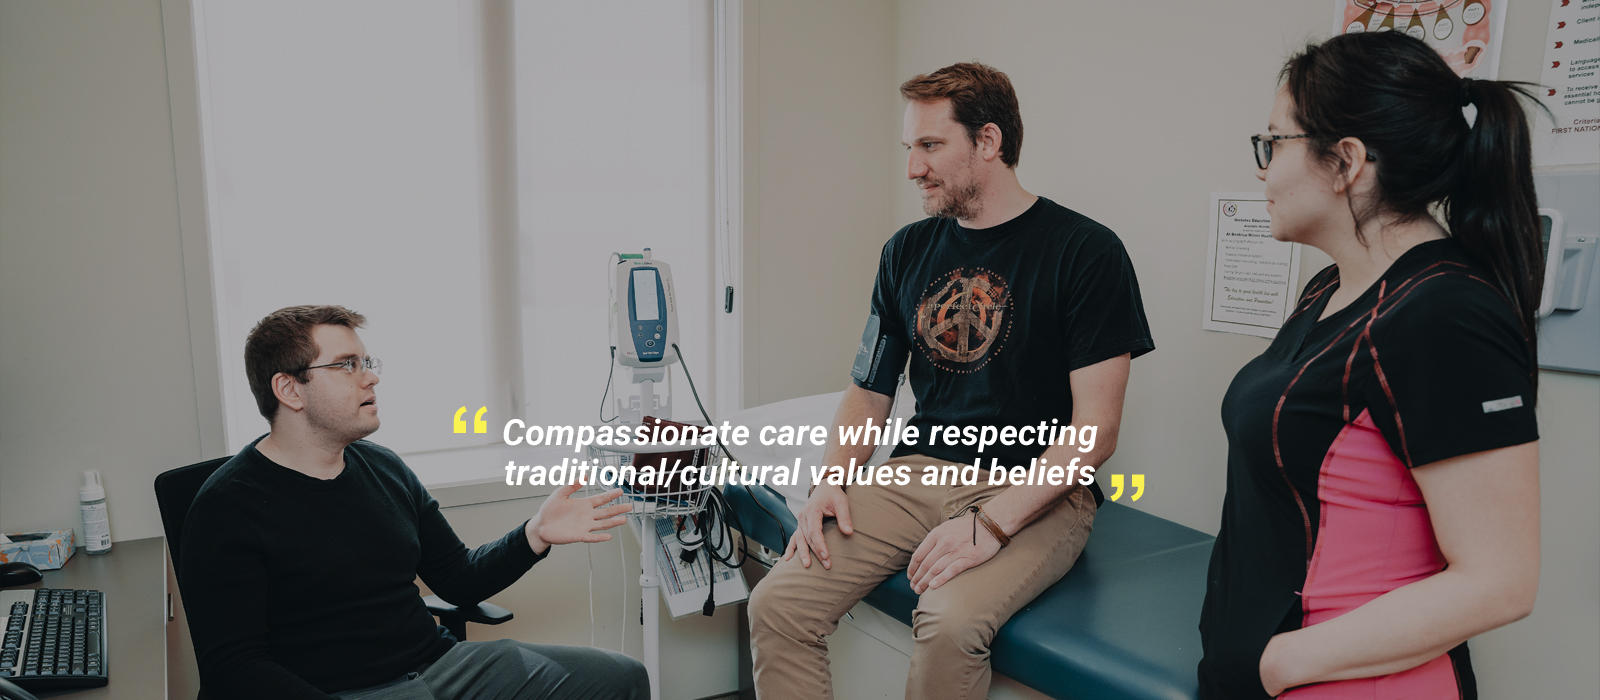 Compassionate care while respecting traditional/cultural values and beliefs